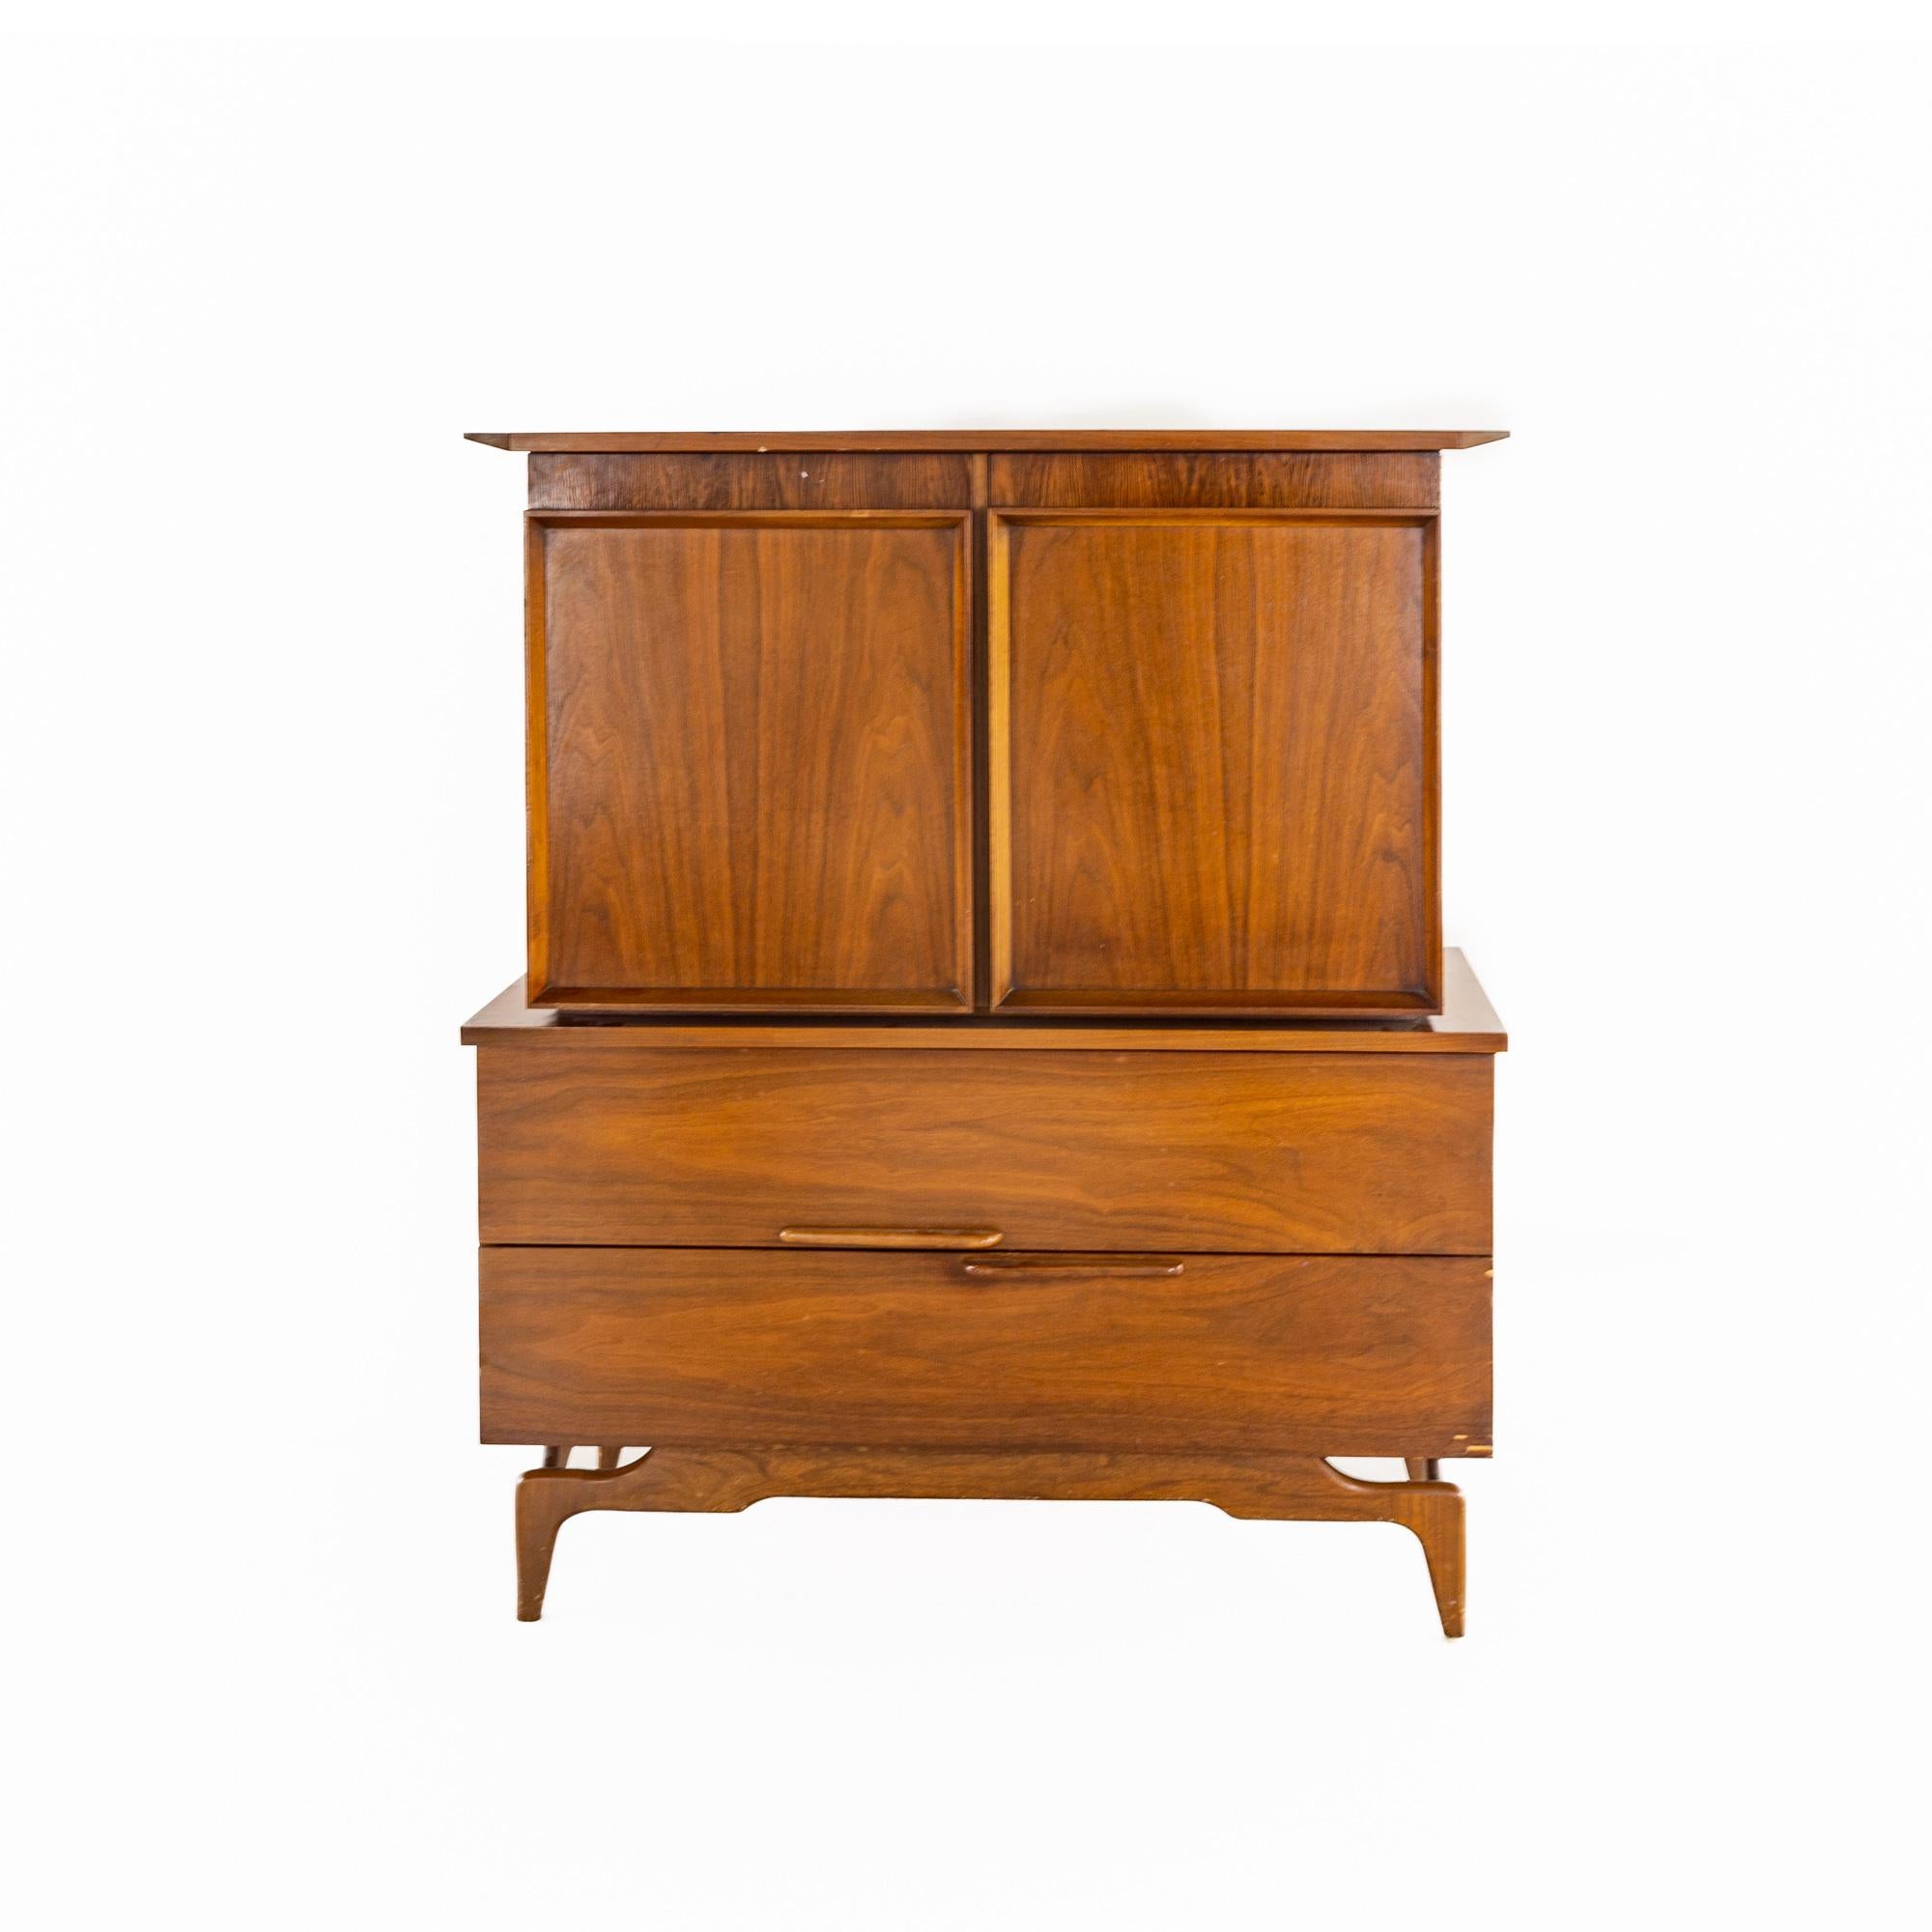 Albert Parvin style mid century walnut highboy dresser

The dresser measures: 42 wide x 20 deep x 49.5 inches high

All pieces of furniture can be had in what we call restored vintage condition. That means the piece is restored upon purchase so